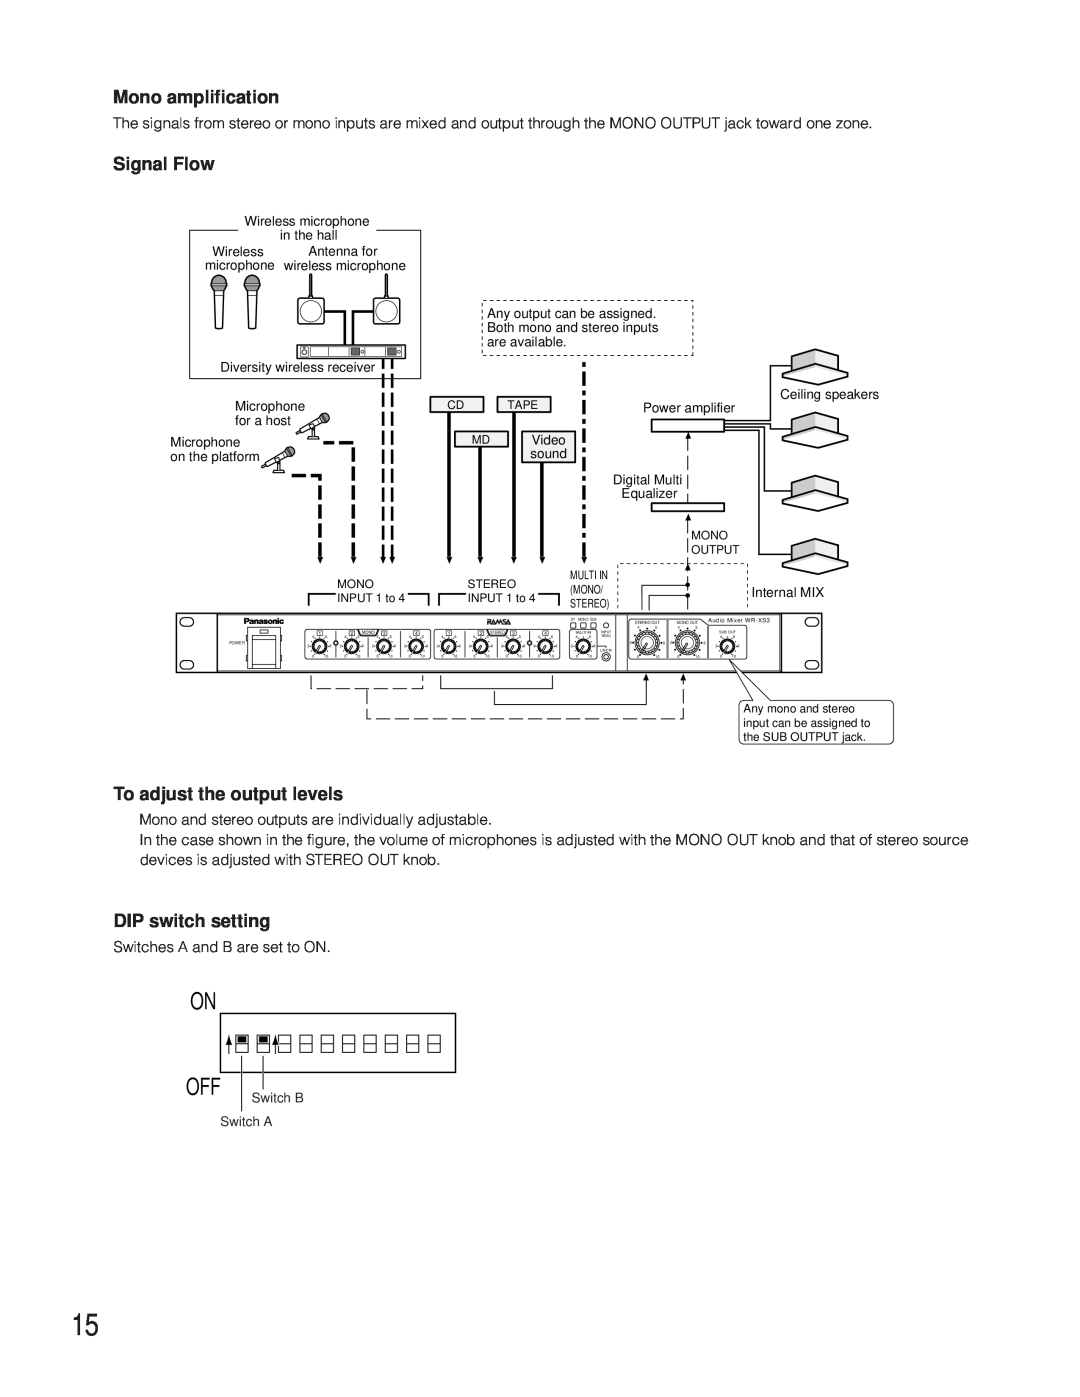 Panasonic WR-XS3P operating instructions Mono amplification, DIP switch setting, Signal Flow, To adjust the output levels 